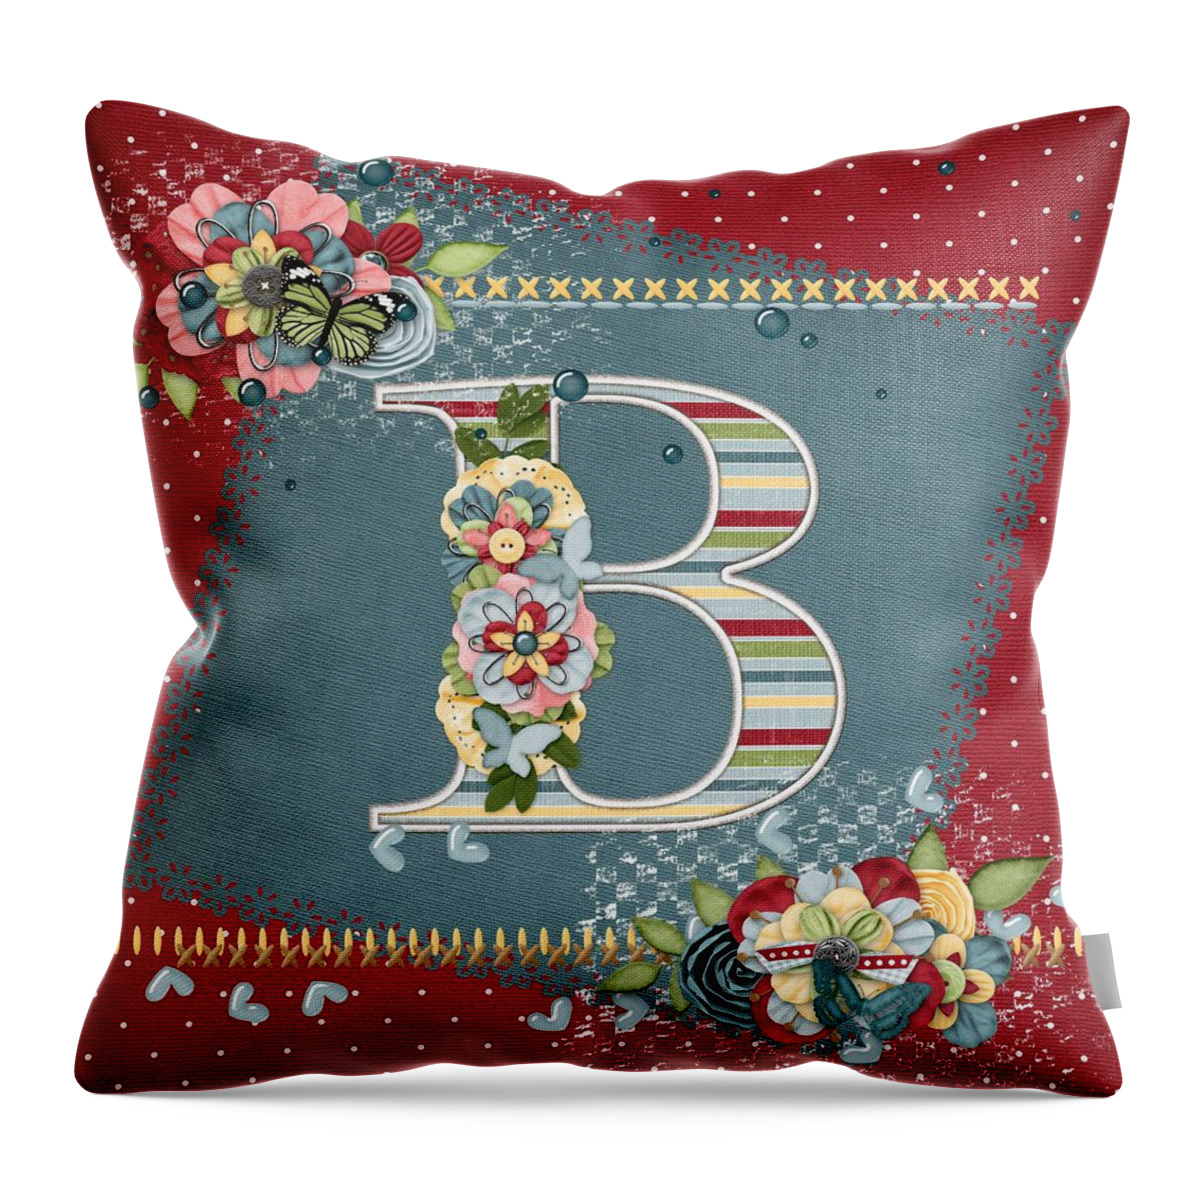 Monogram Throw Pillow featuring the digital art Country Charm Monogramed B by Debra Miller